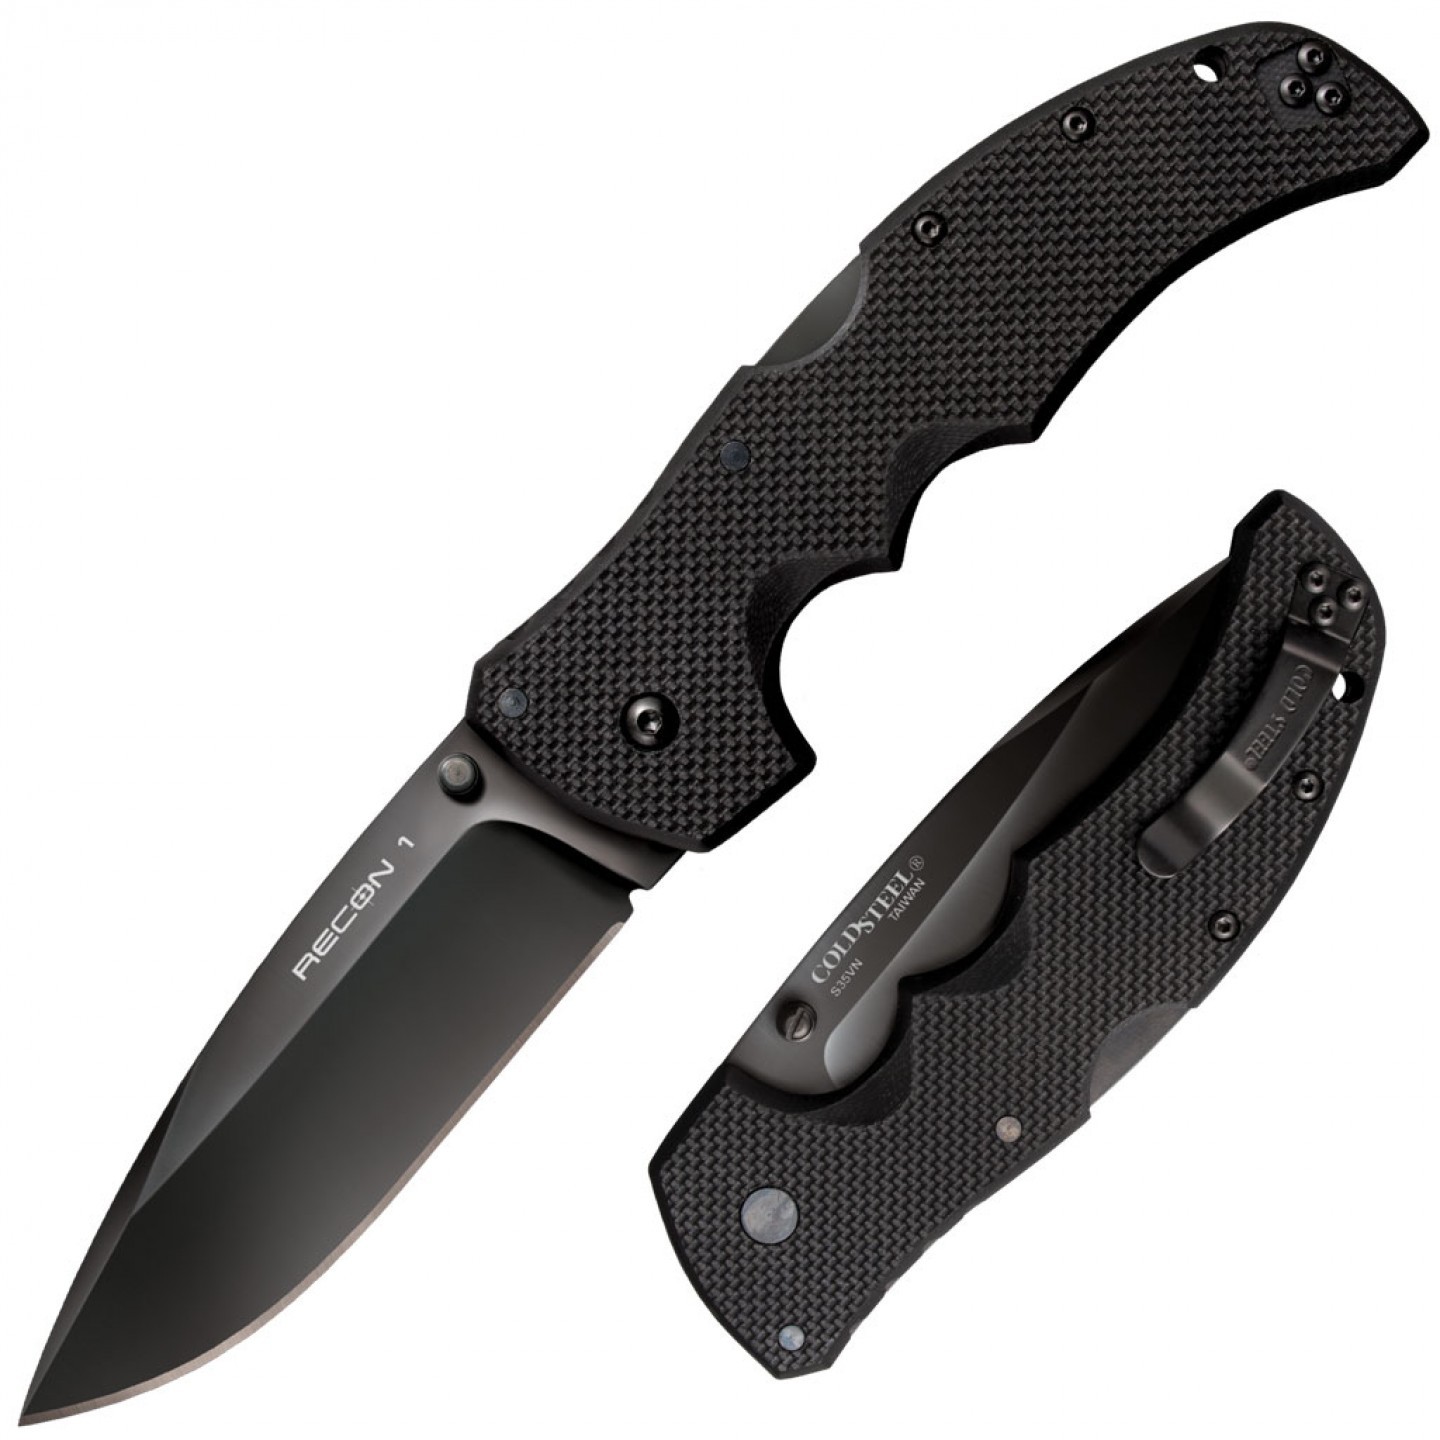   Cold Steel Recon 1 Spear,  S35VN,  G10, black